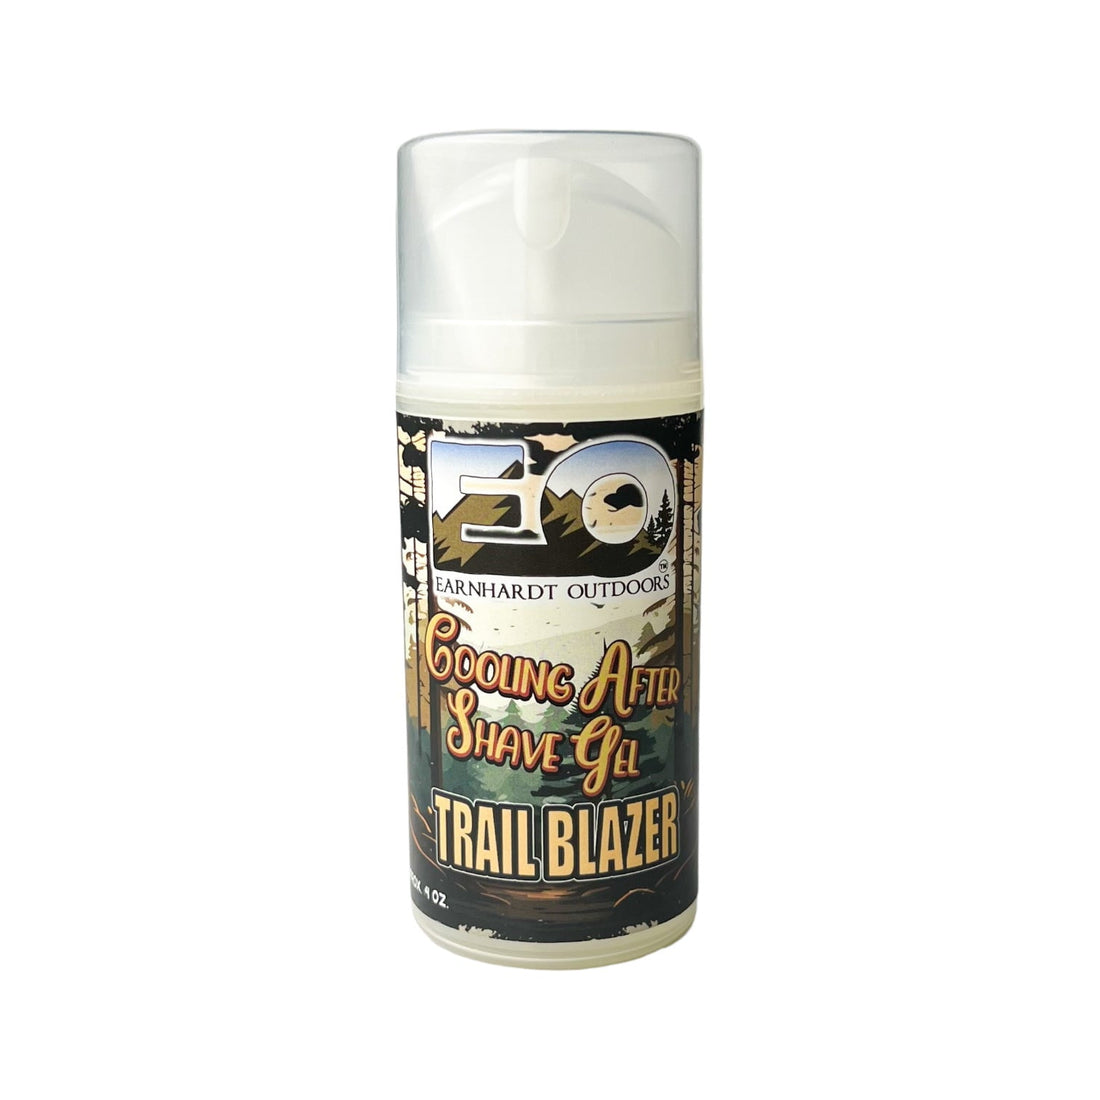 Trail Blazer Earnhardt Outdoors After Shave - Old Town Soap Co.